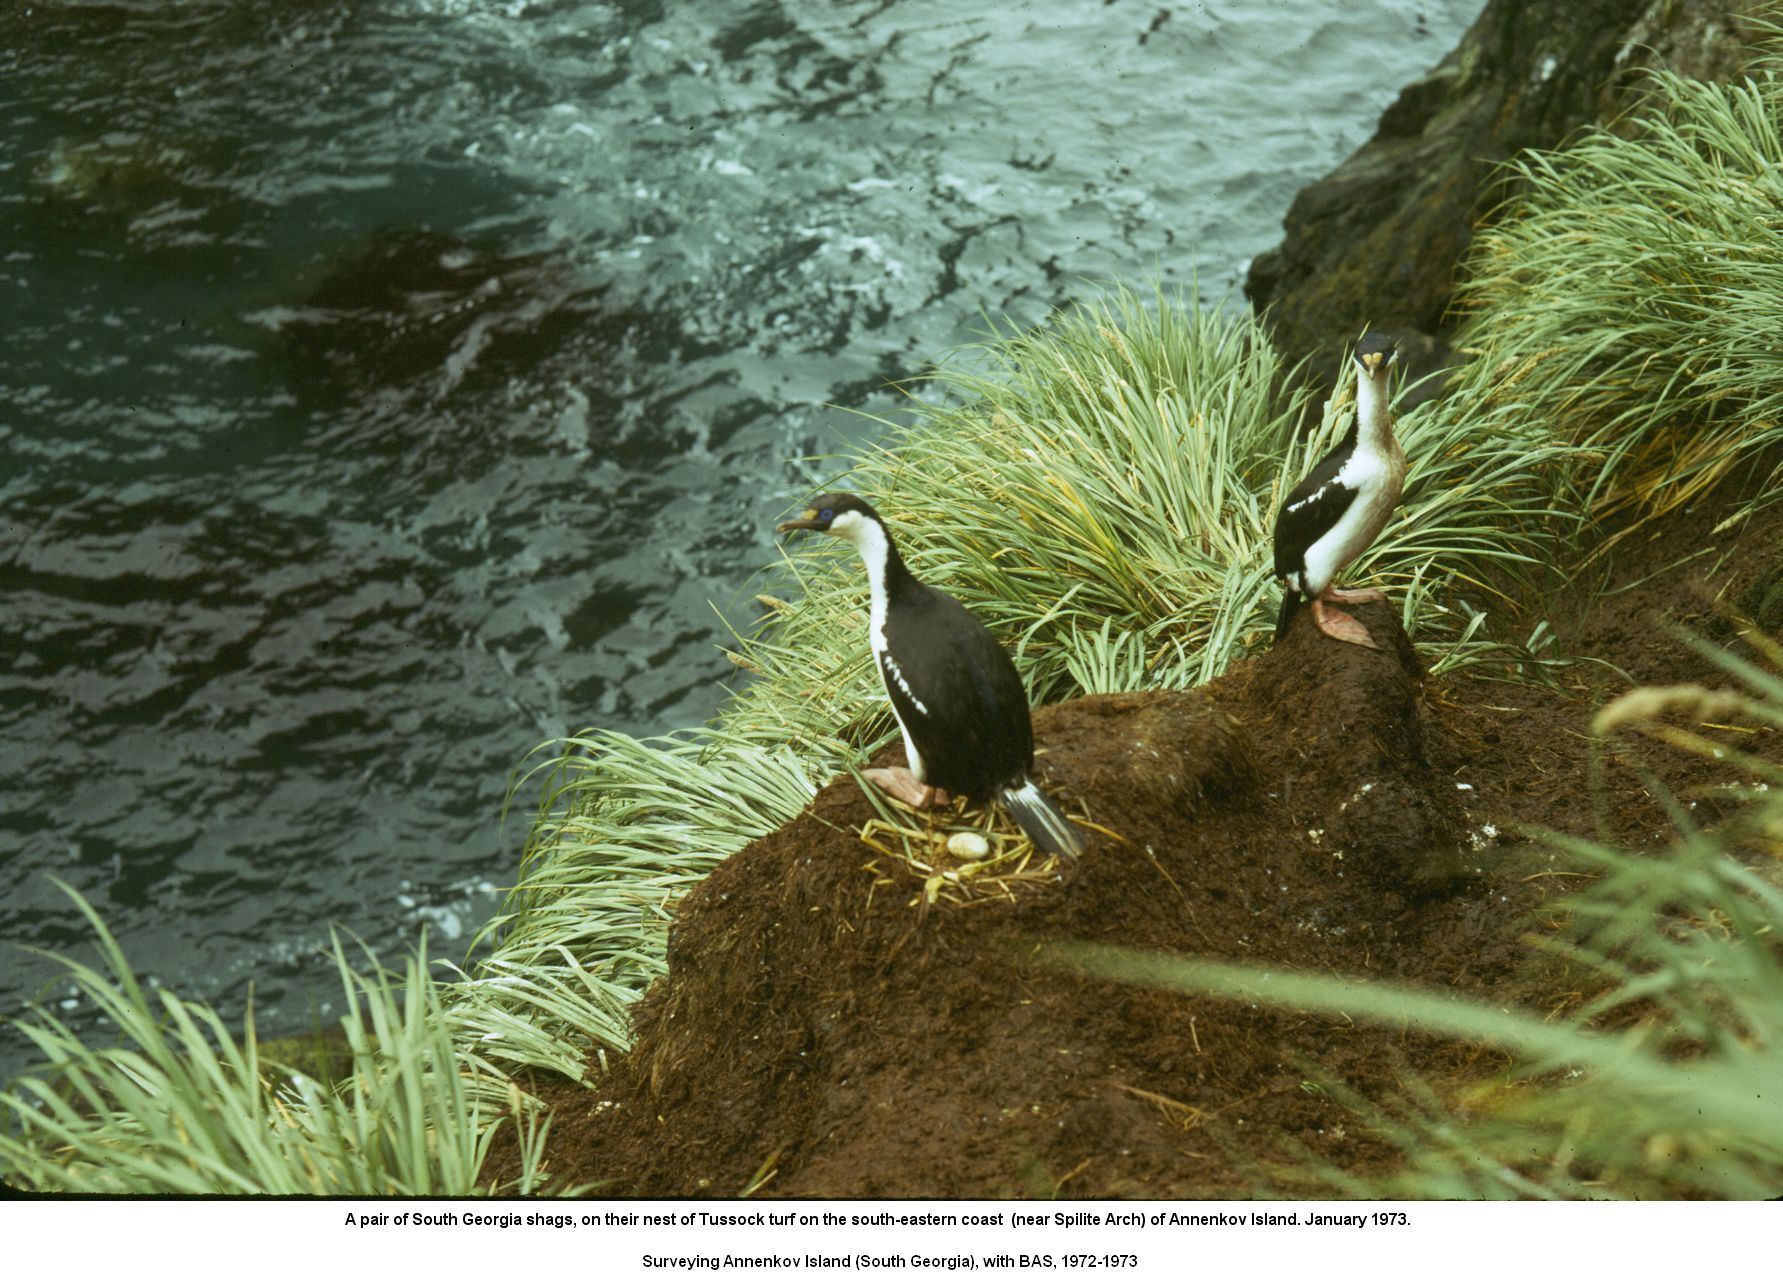 A pair of South Georgia shags, on their nest of Tussock turf on the south-eastern coast (near Spilite Arch) of Annenkov Island. January 1973.